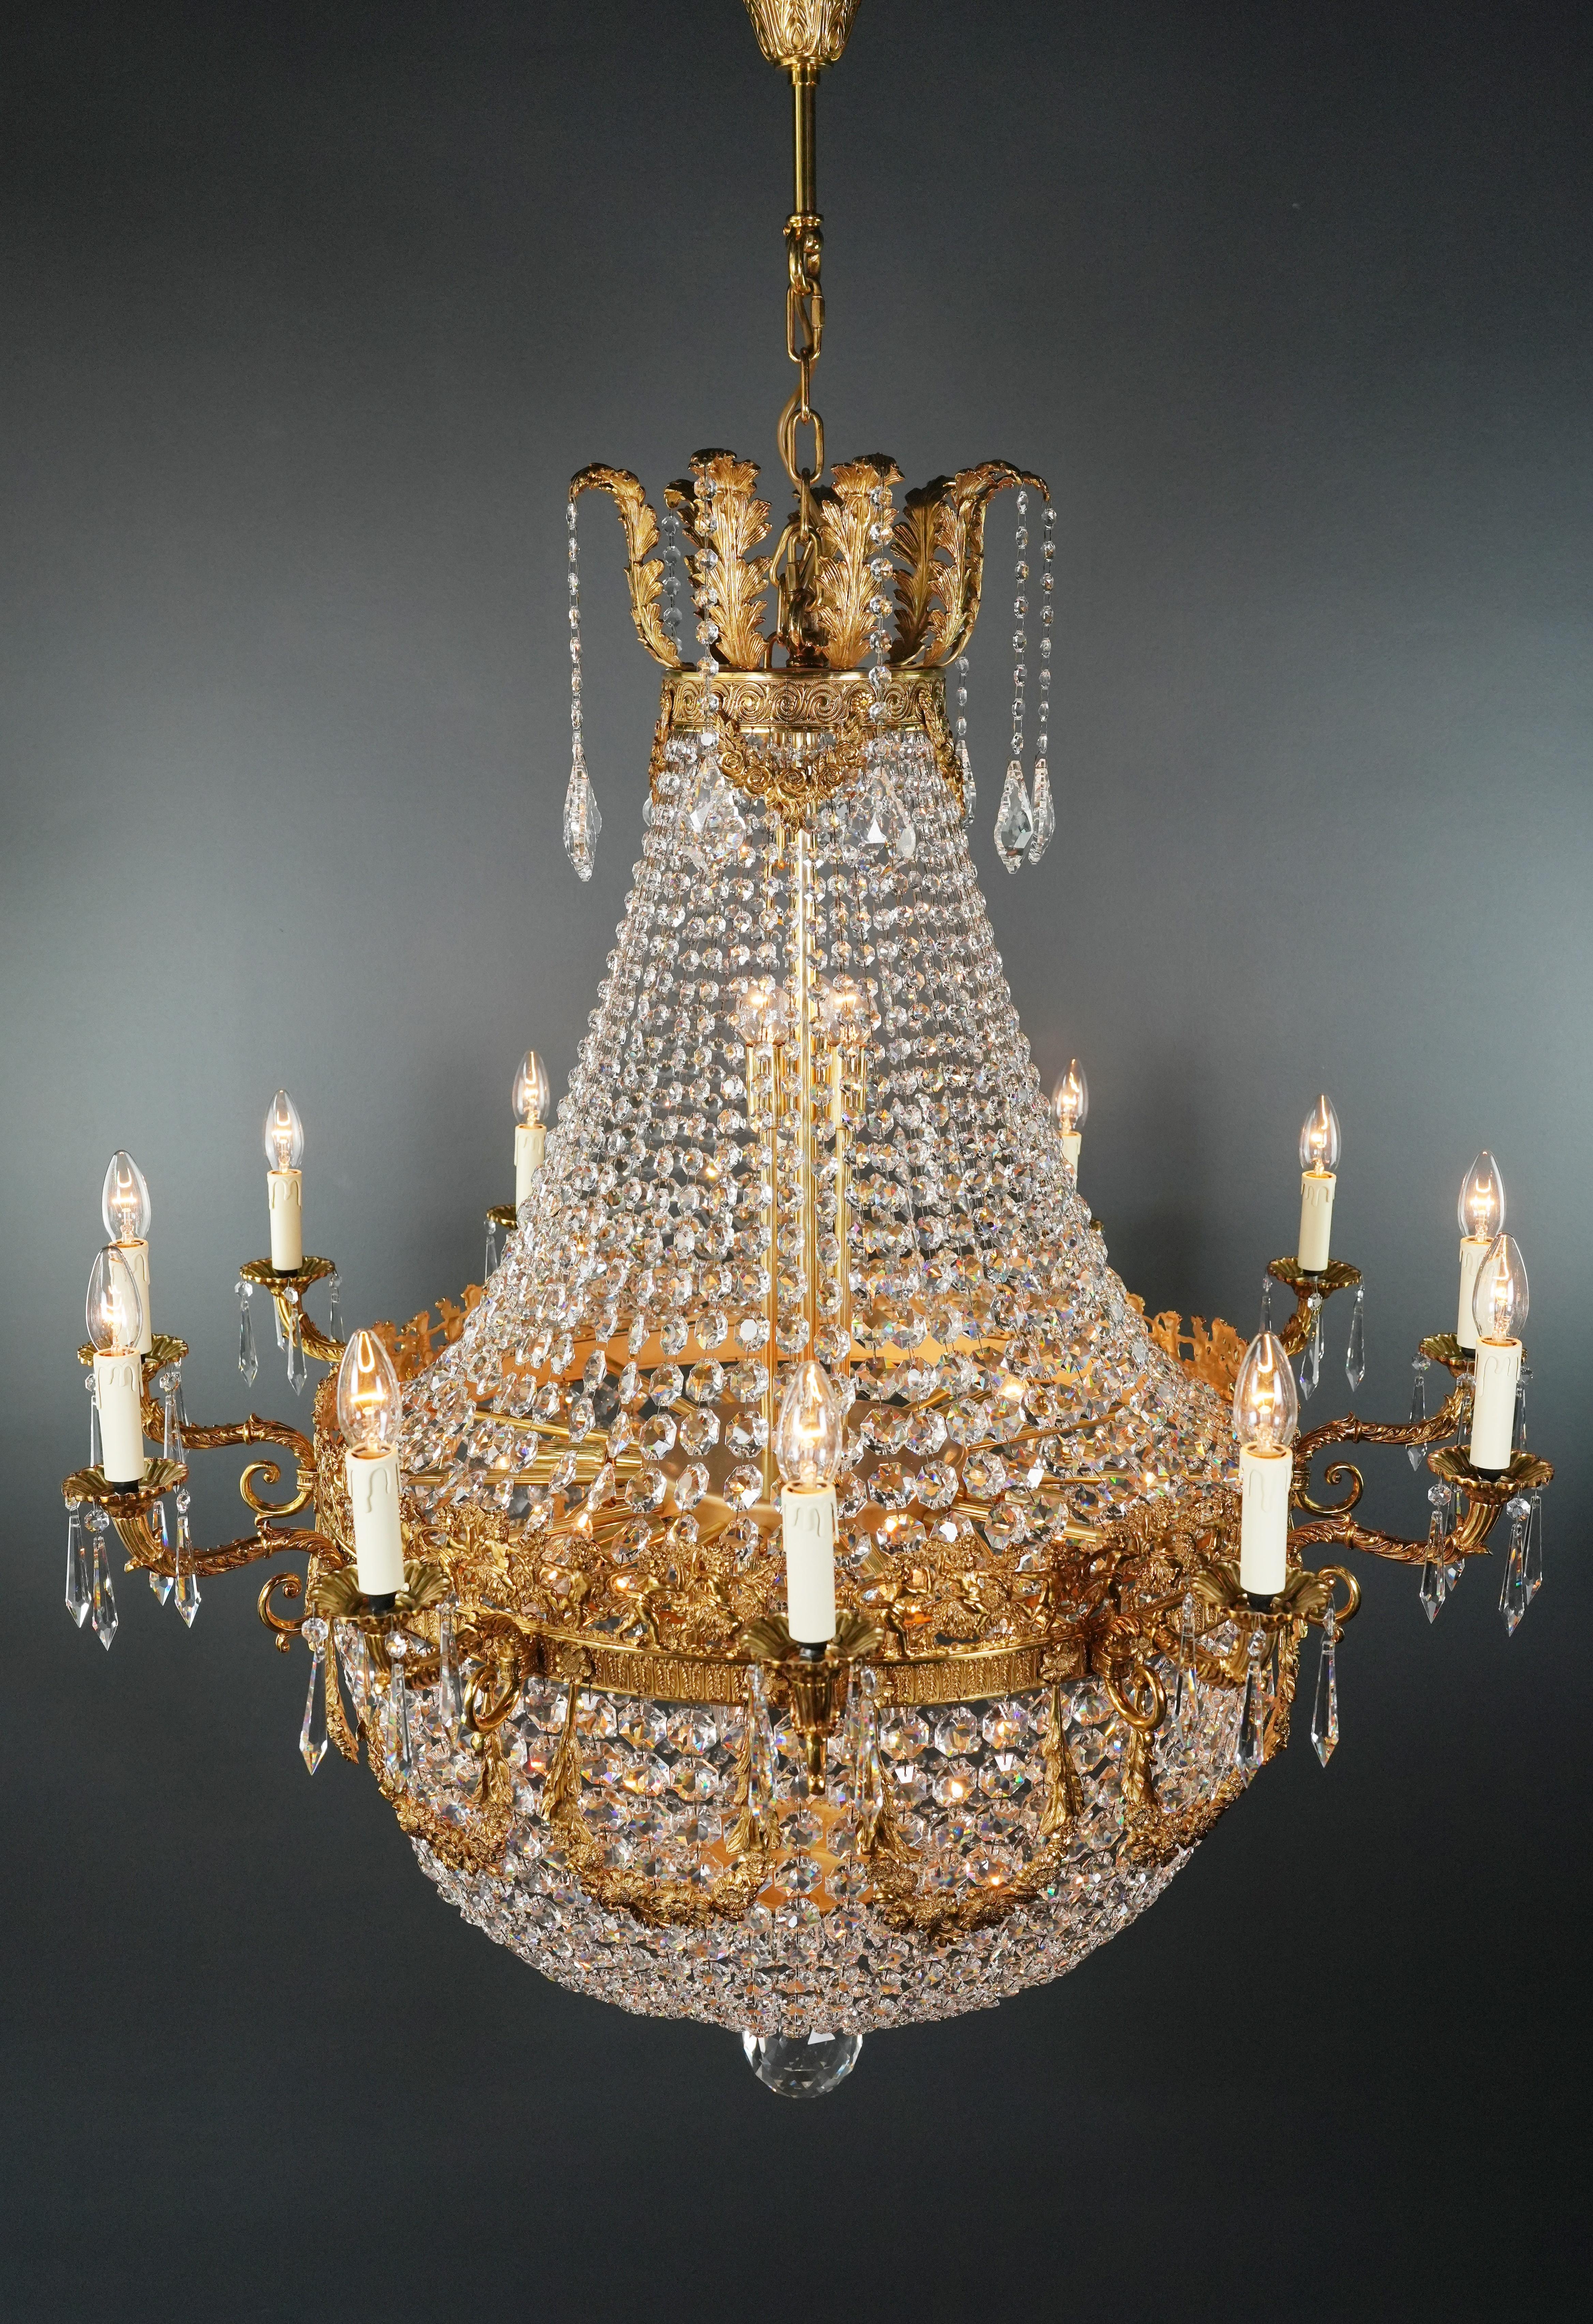 German Wreat Brass Basket Empire Sac a Pearl Chandelier Crystal and Antique Gold For Sale